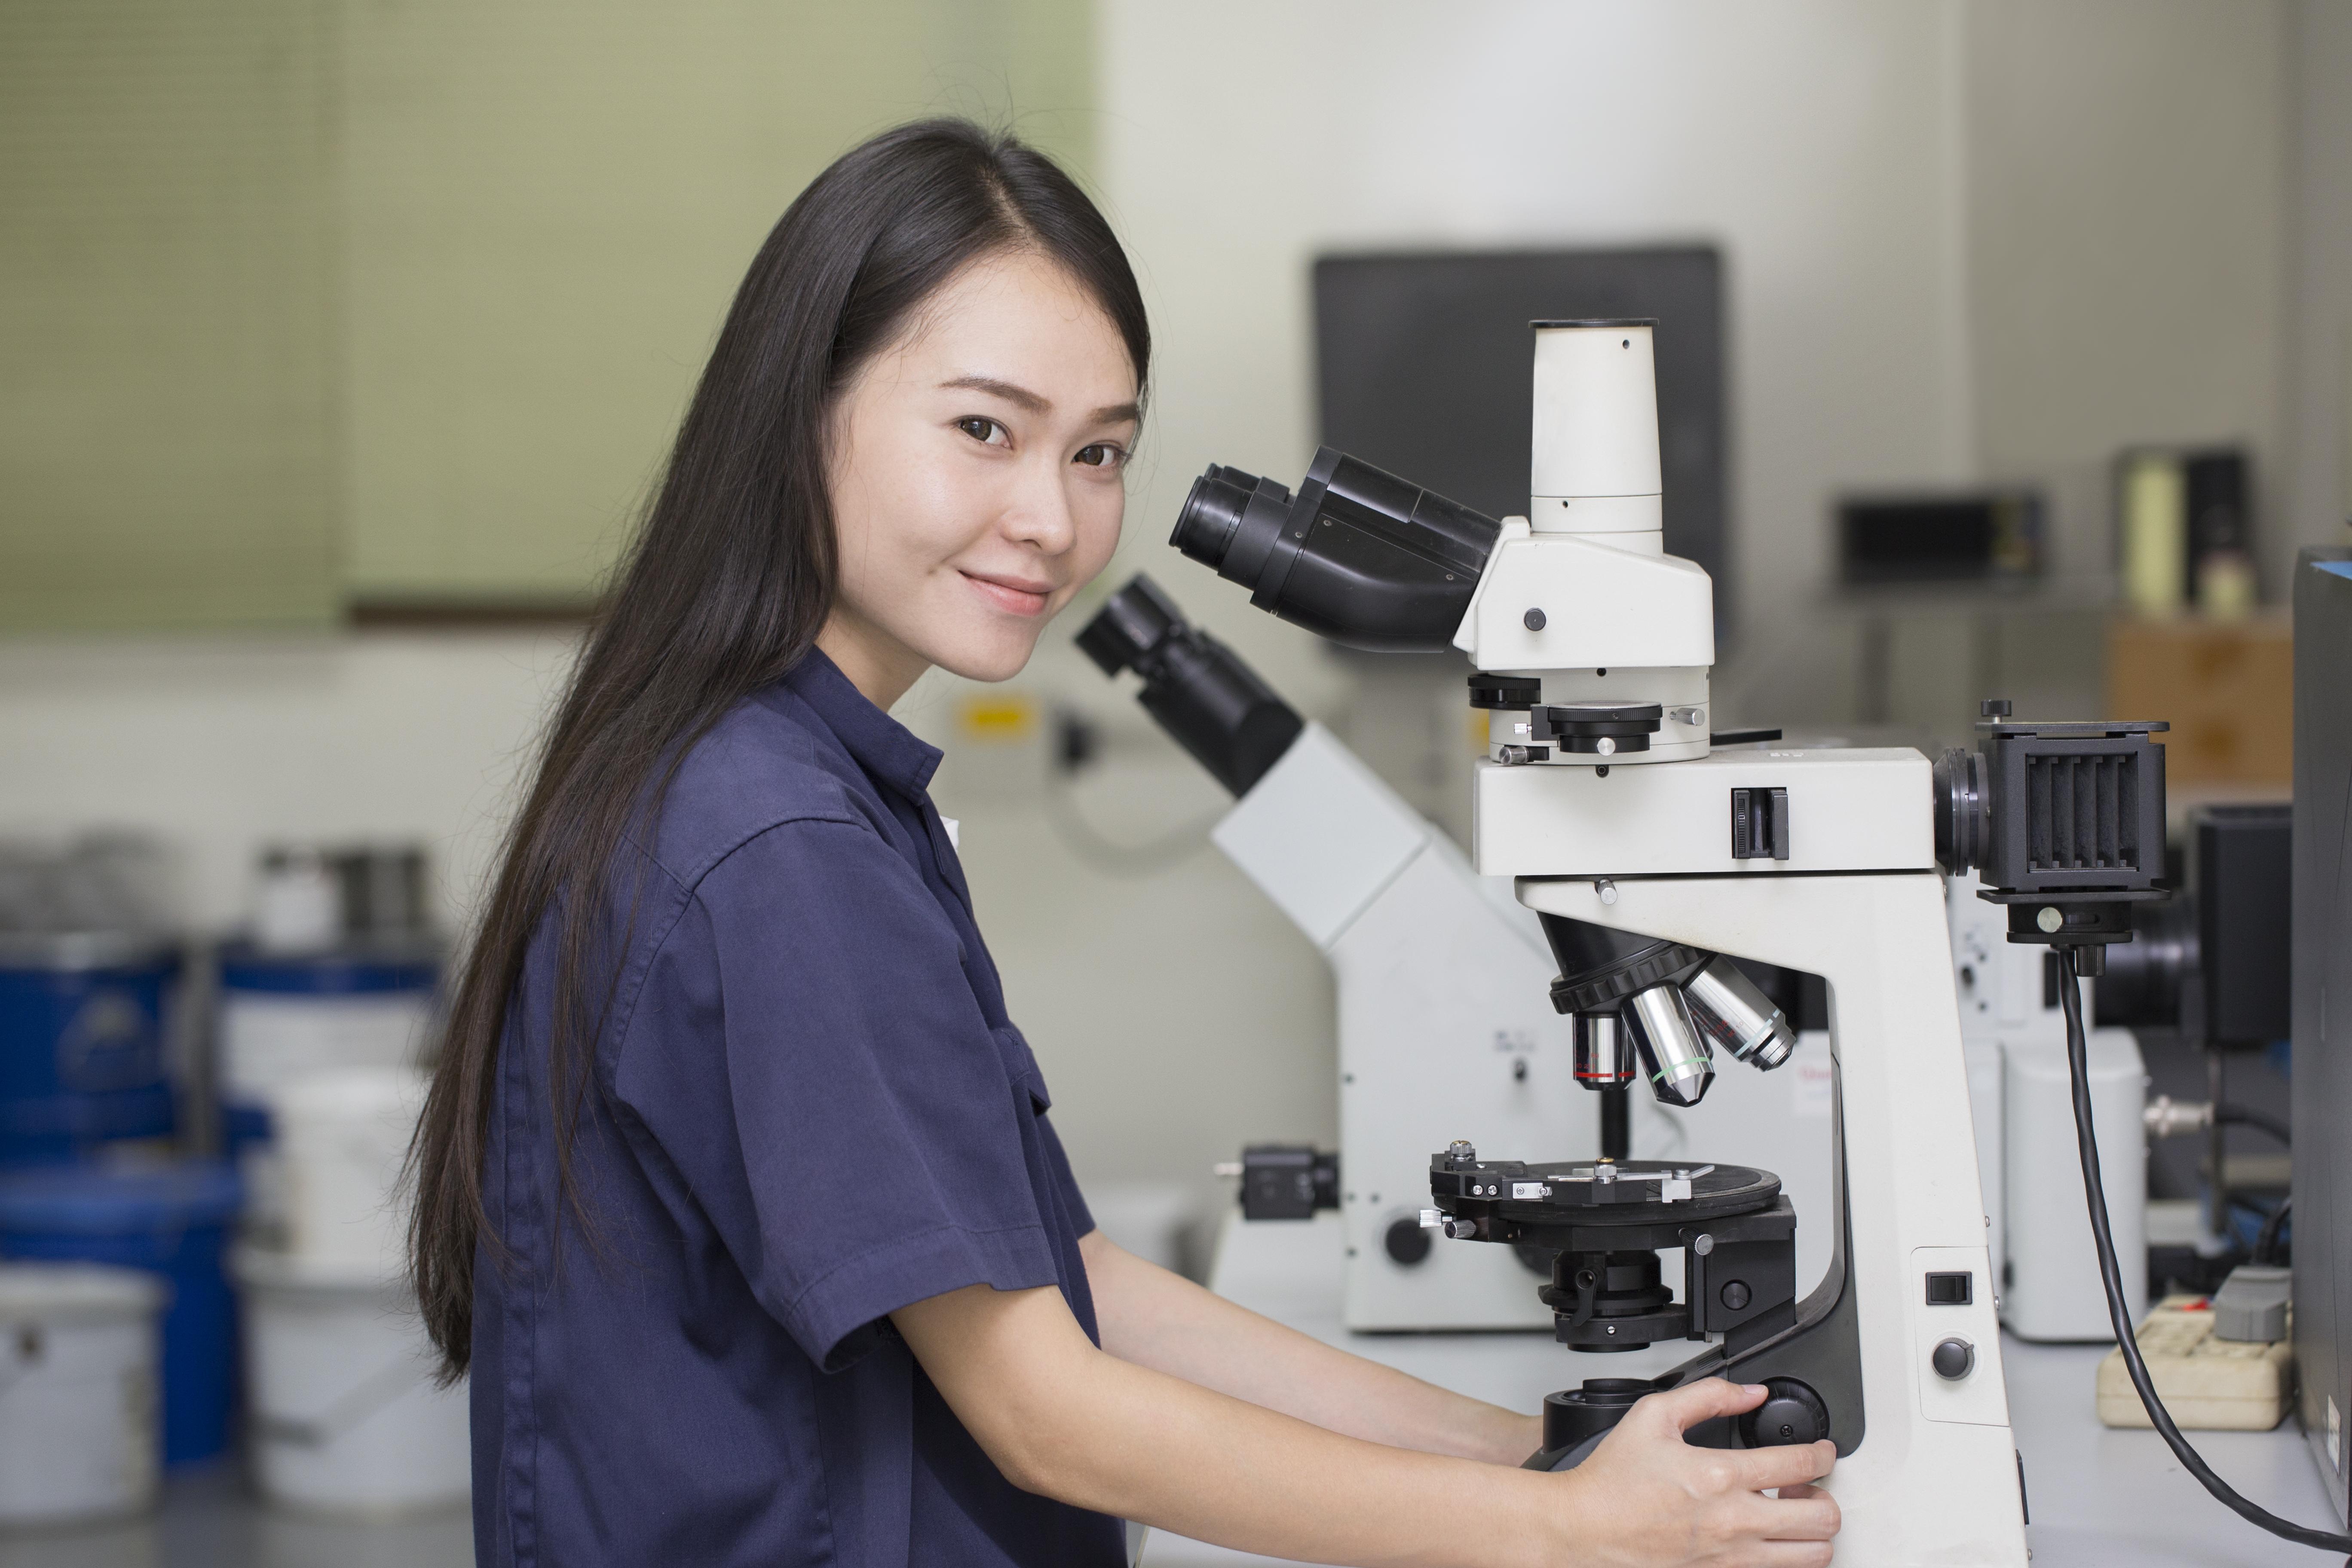 Female scientist looks at camera in front of microscope